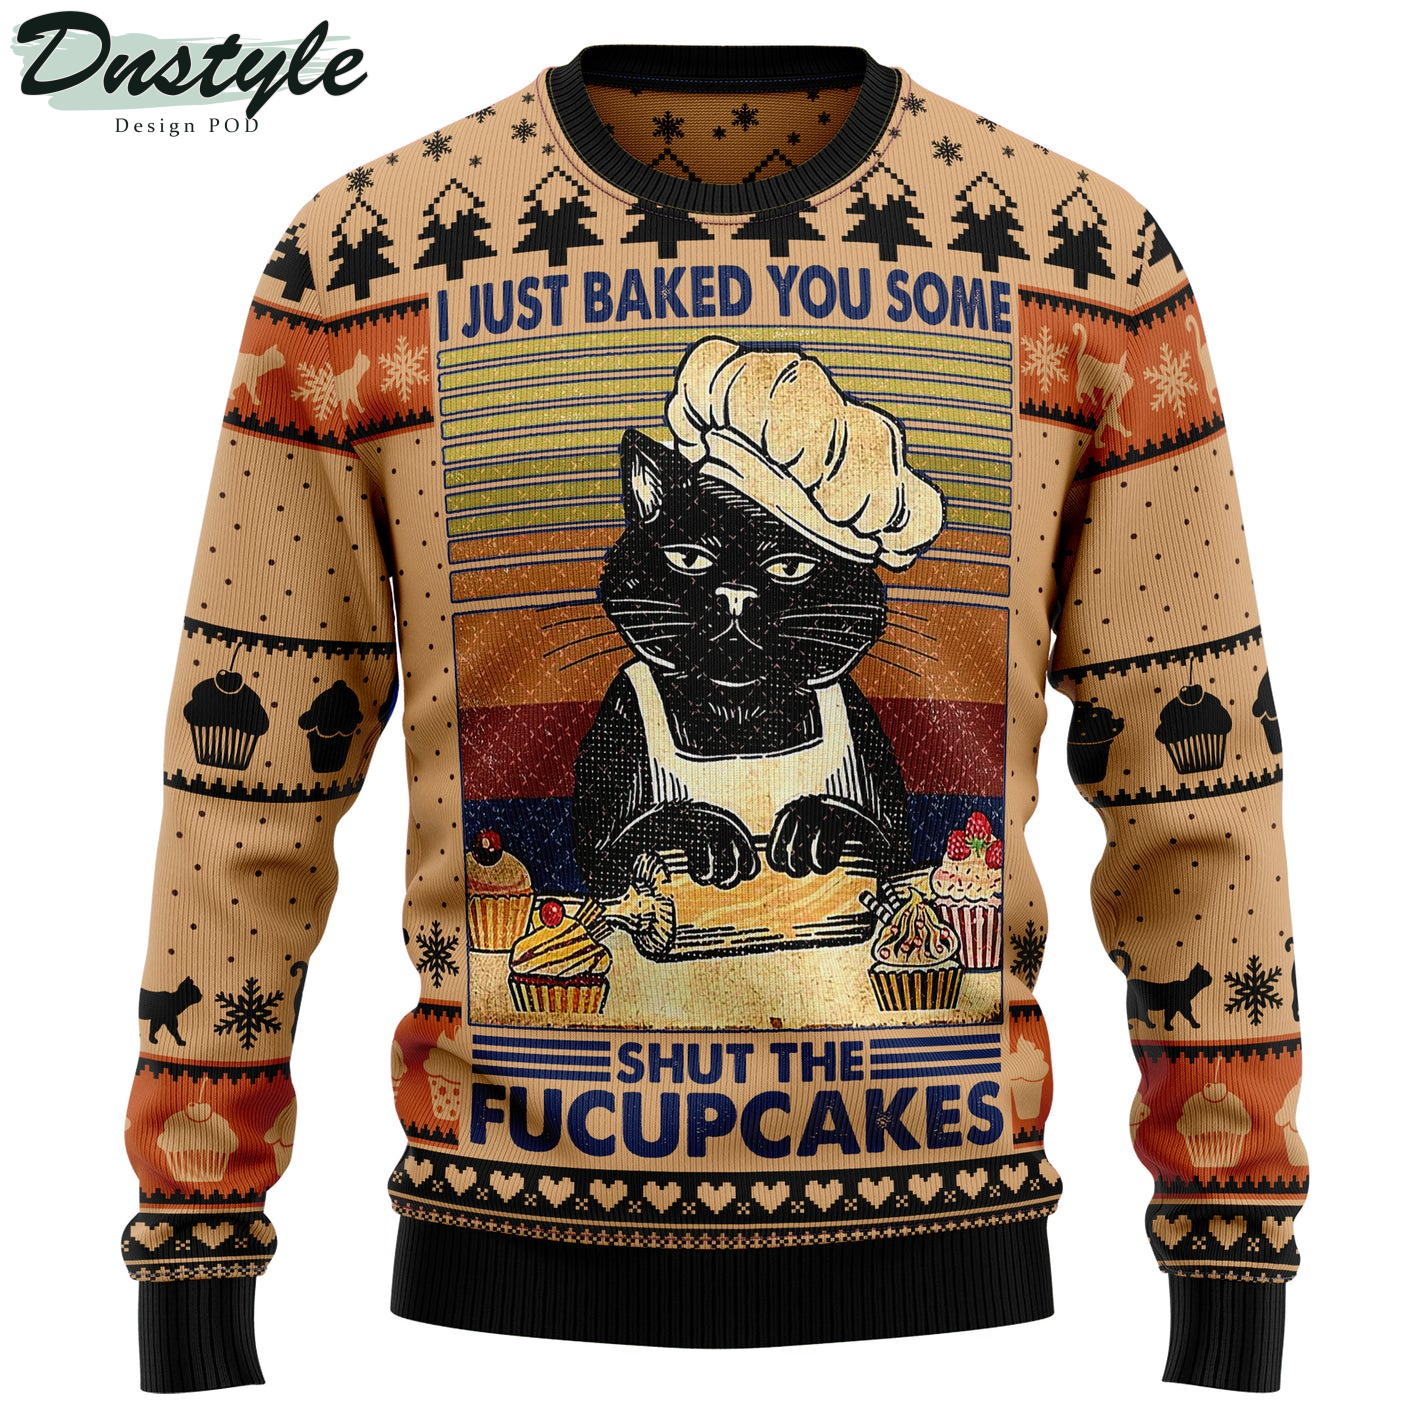 It's Just Baked You Some Shut The Fucupcakes Christmas Ugly Sweater